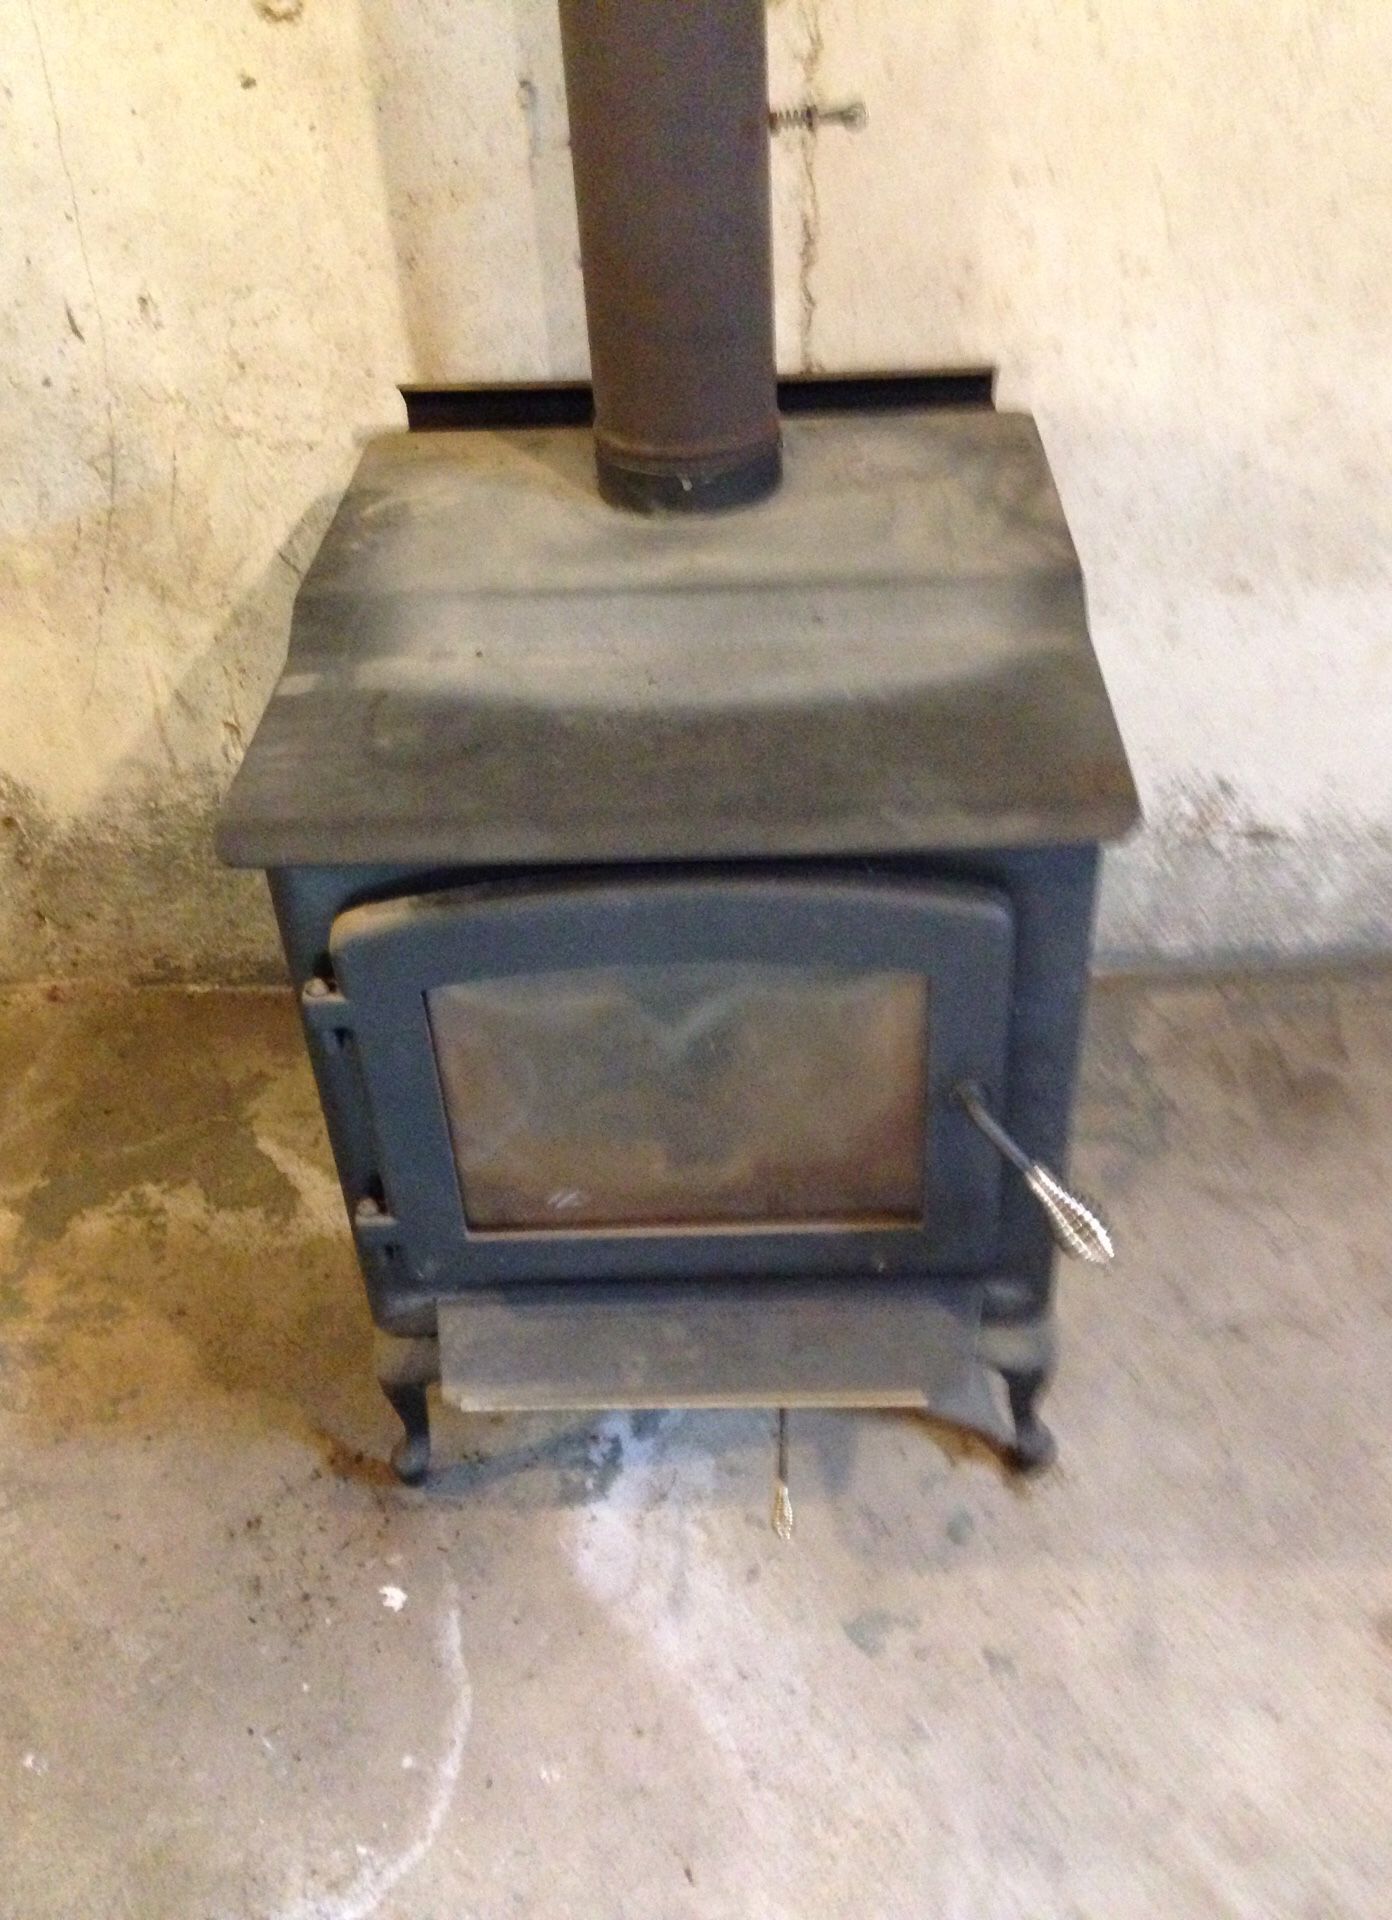 New England Stove Works . Never had any issues. Works excellent. About 6 years old . Ayer